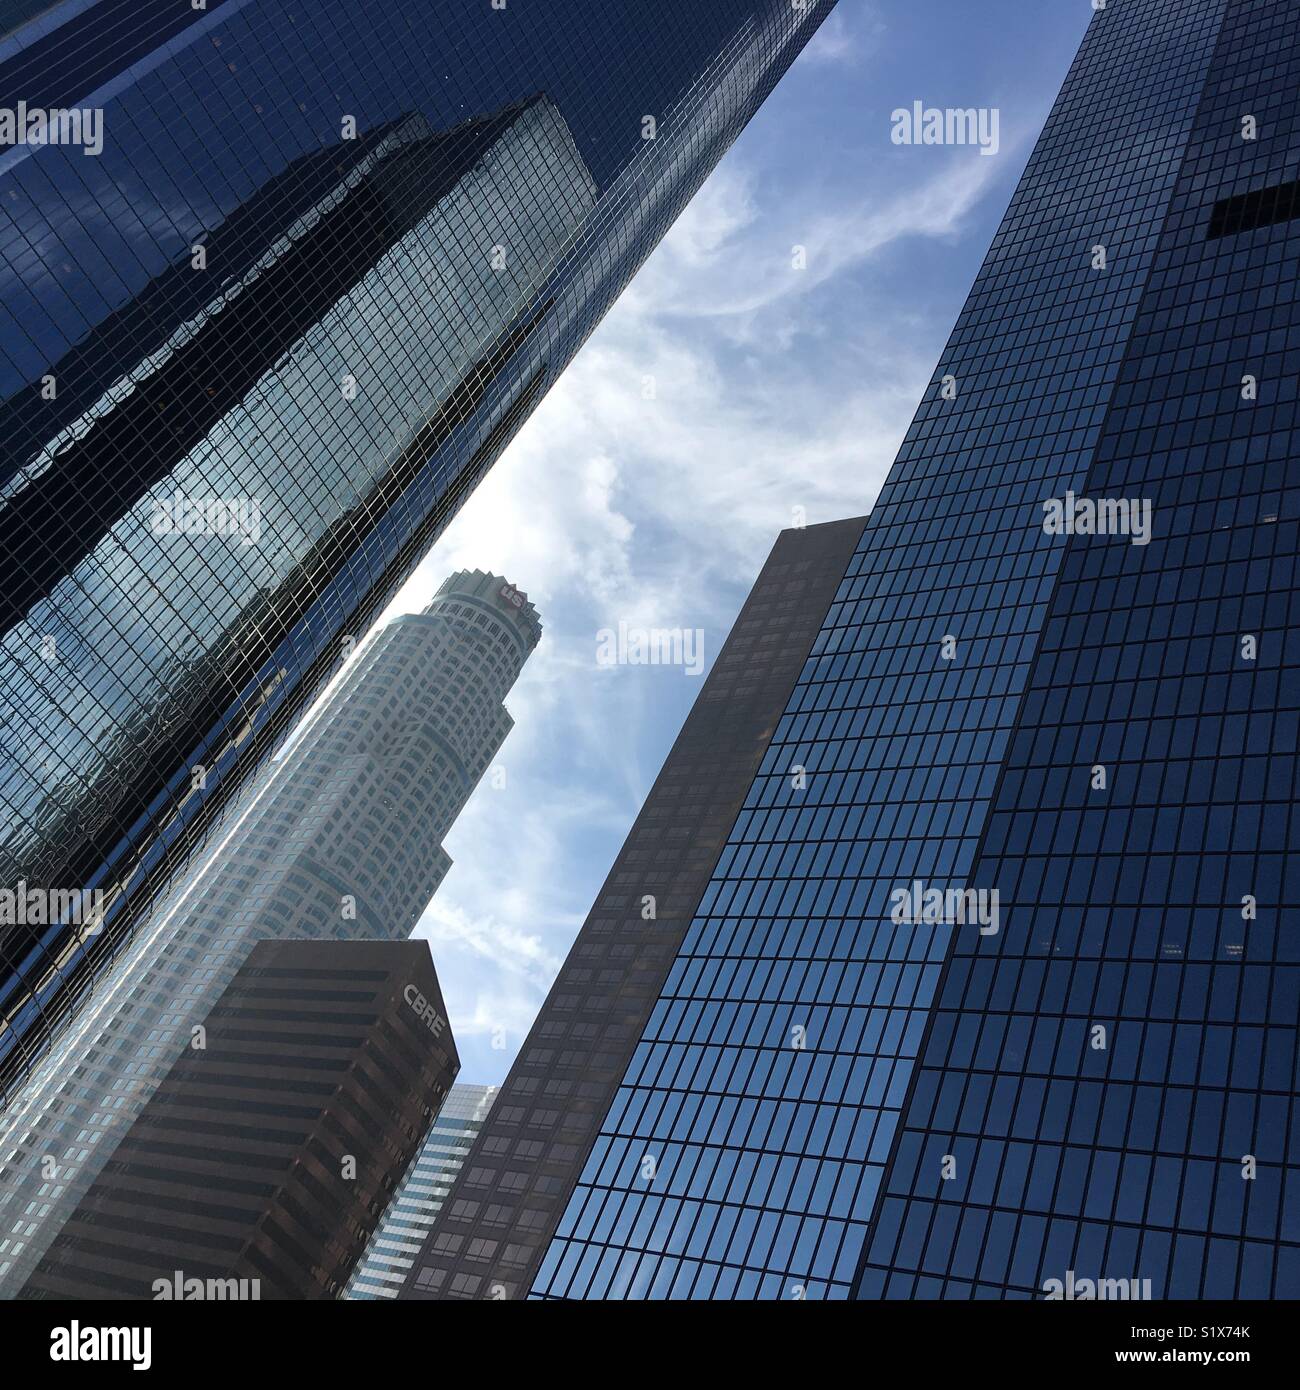 US Bank Tower surrounded by Skyscrapers in Downtown Los Angeles Stock Photo